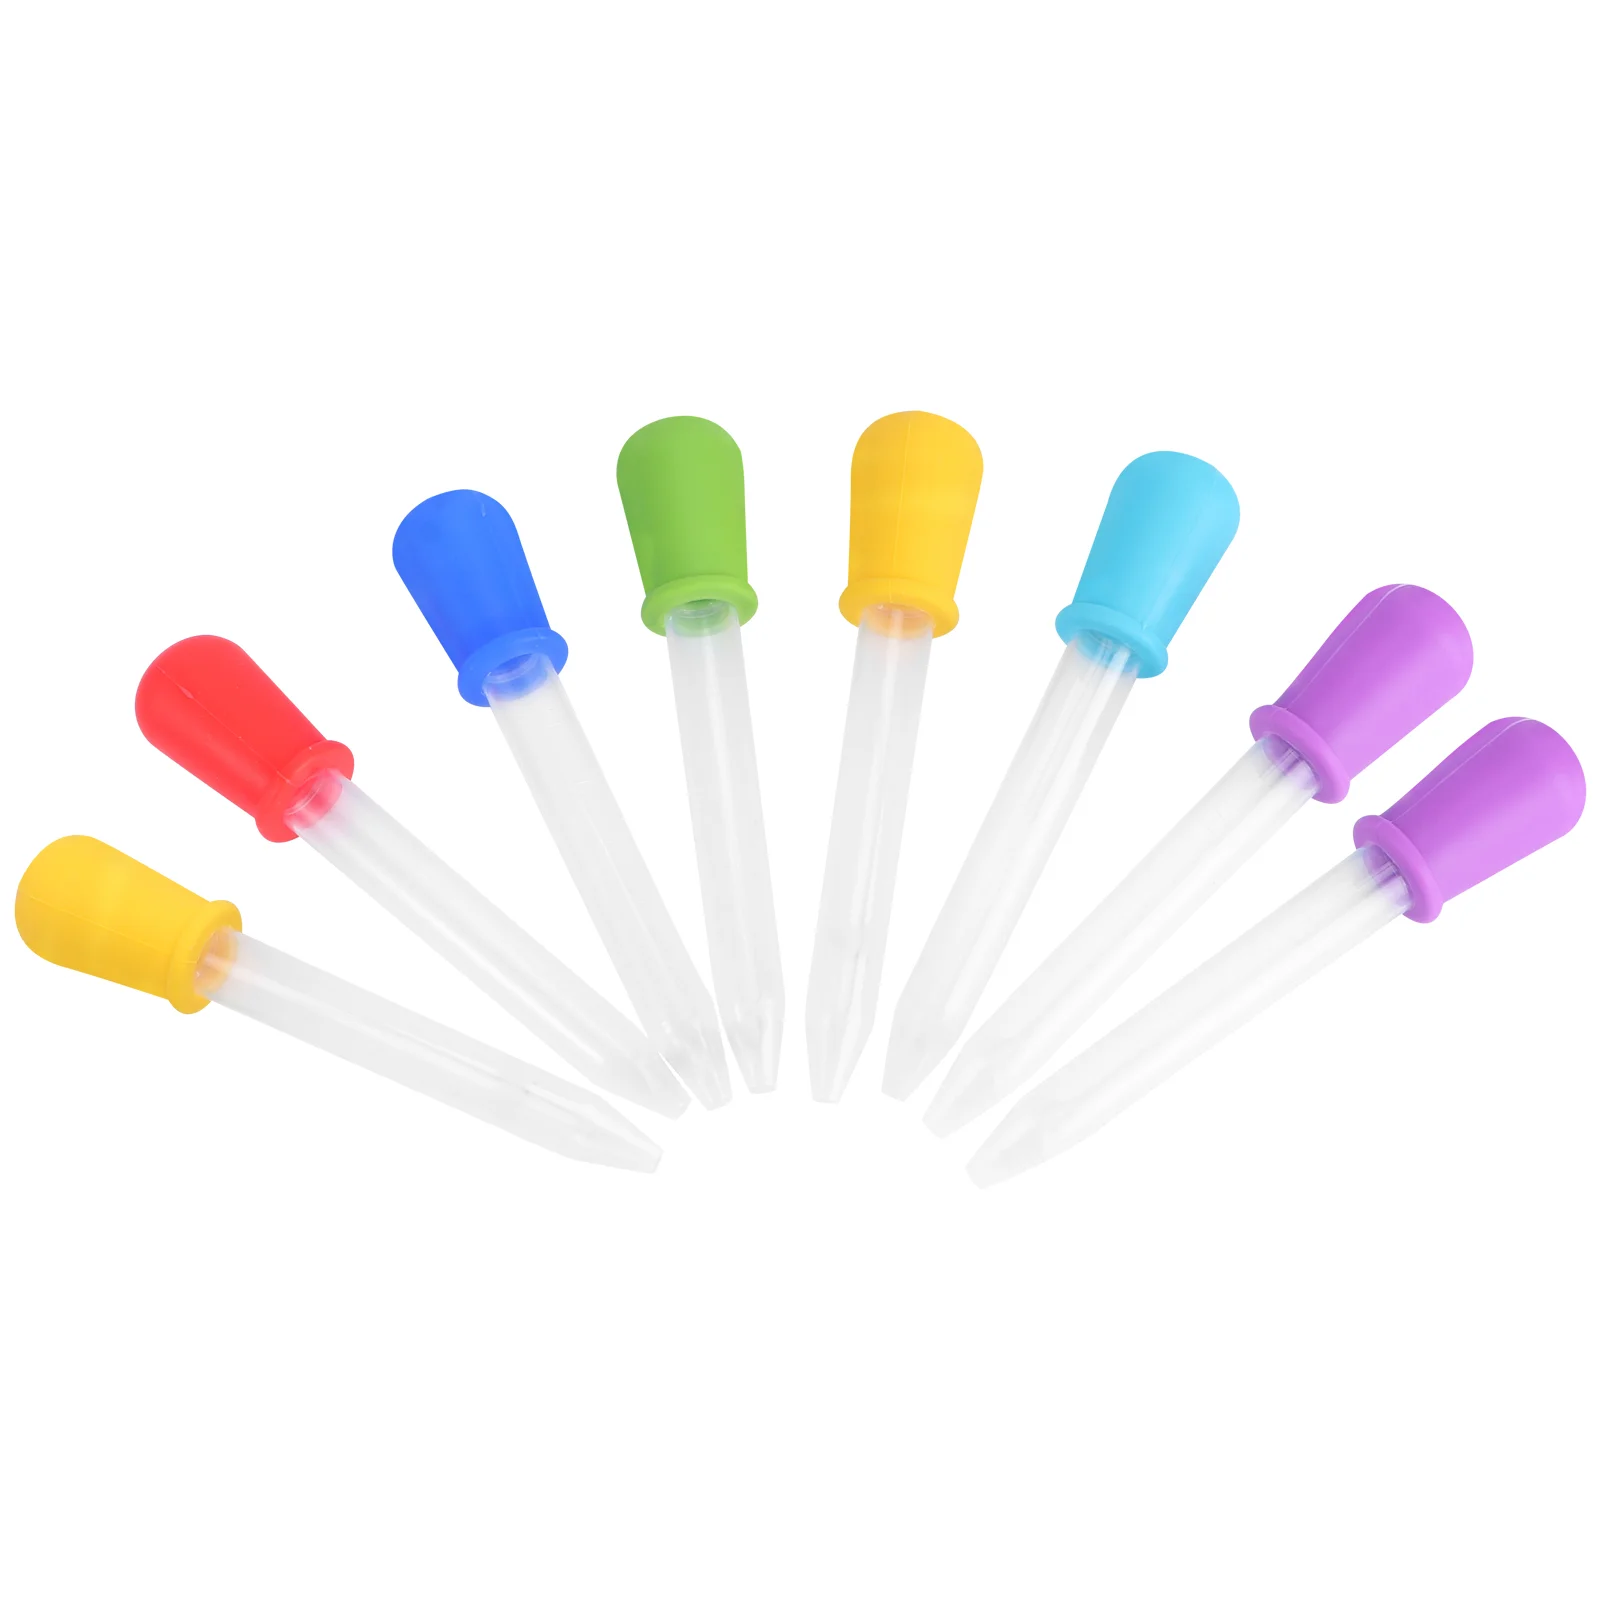 

8pcs Dropper Silicone and Droppers Pipettes with Bulb Tip Eye Dropper Colorful Droppers Pipette Mold for School Home Laboratory